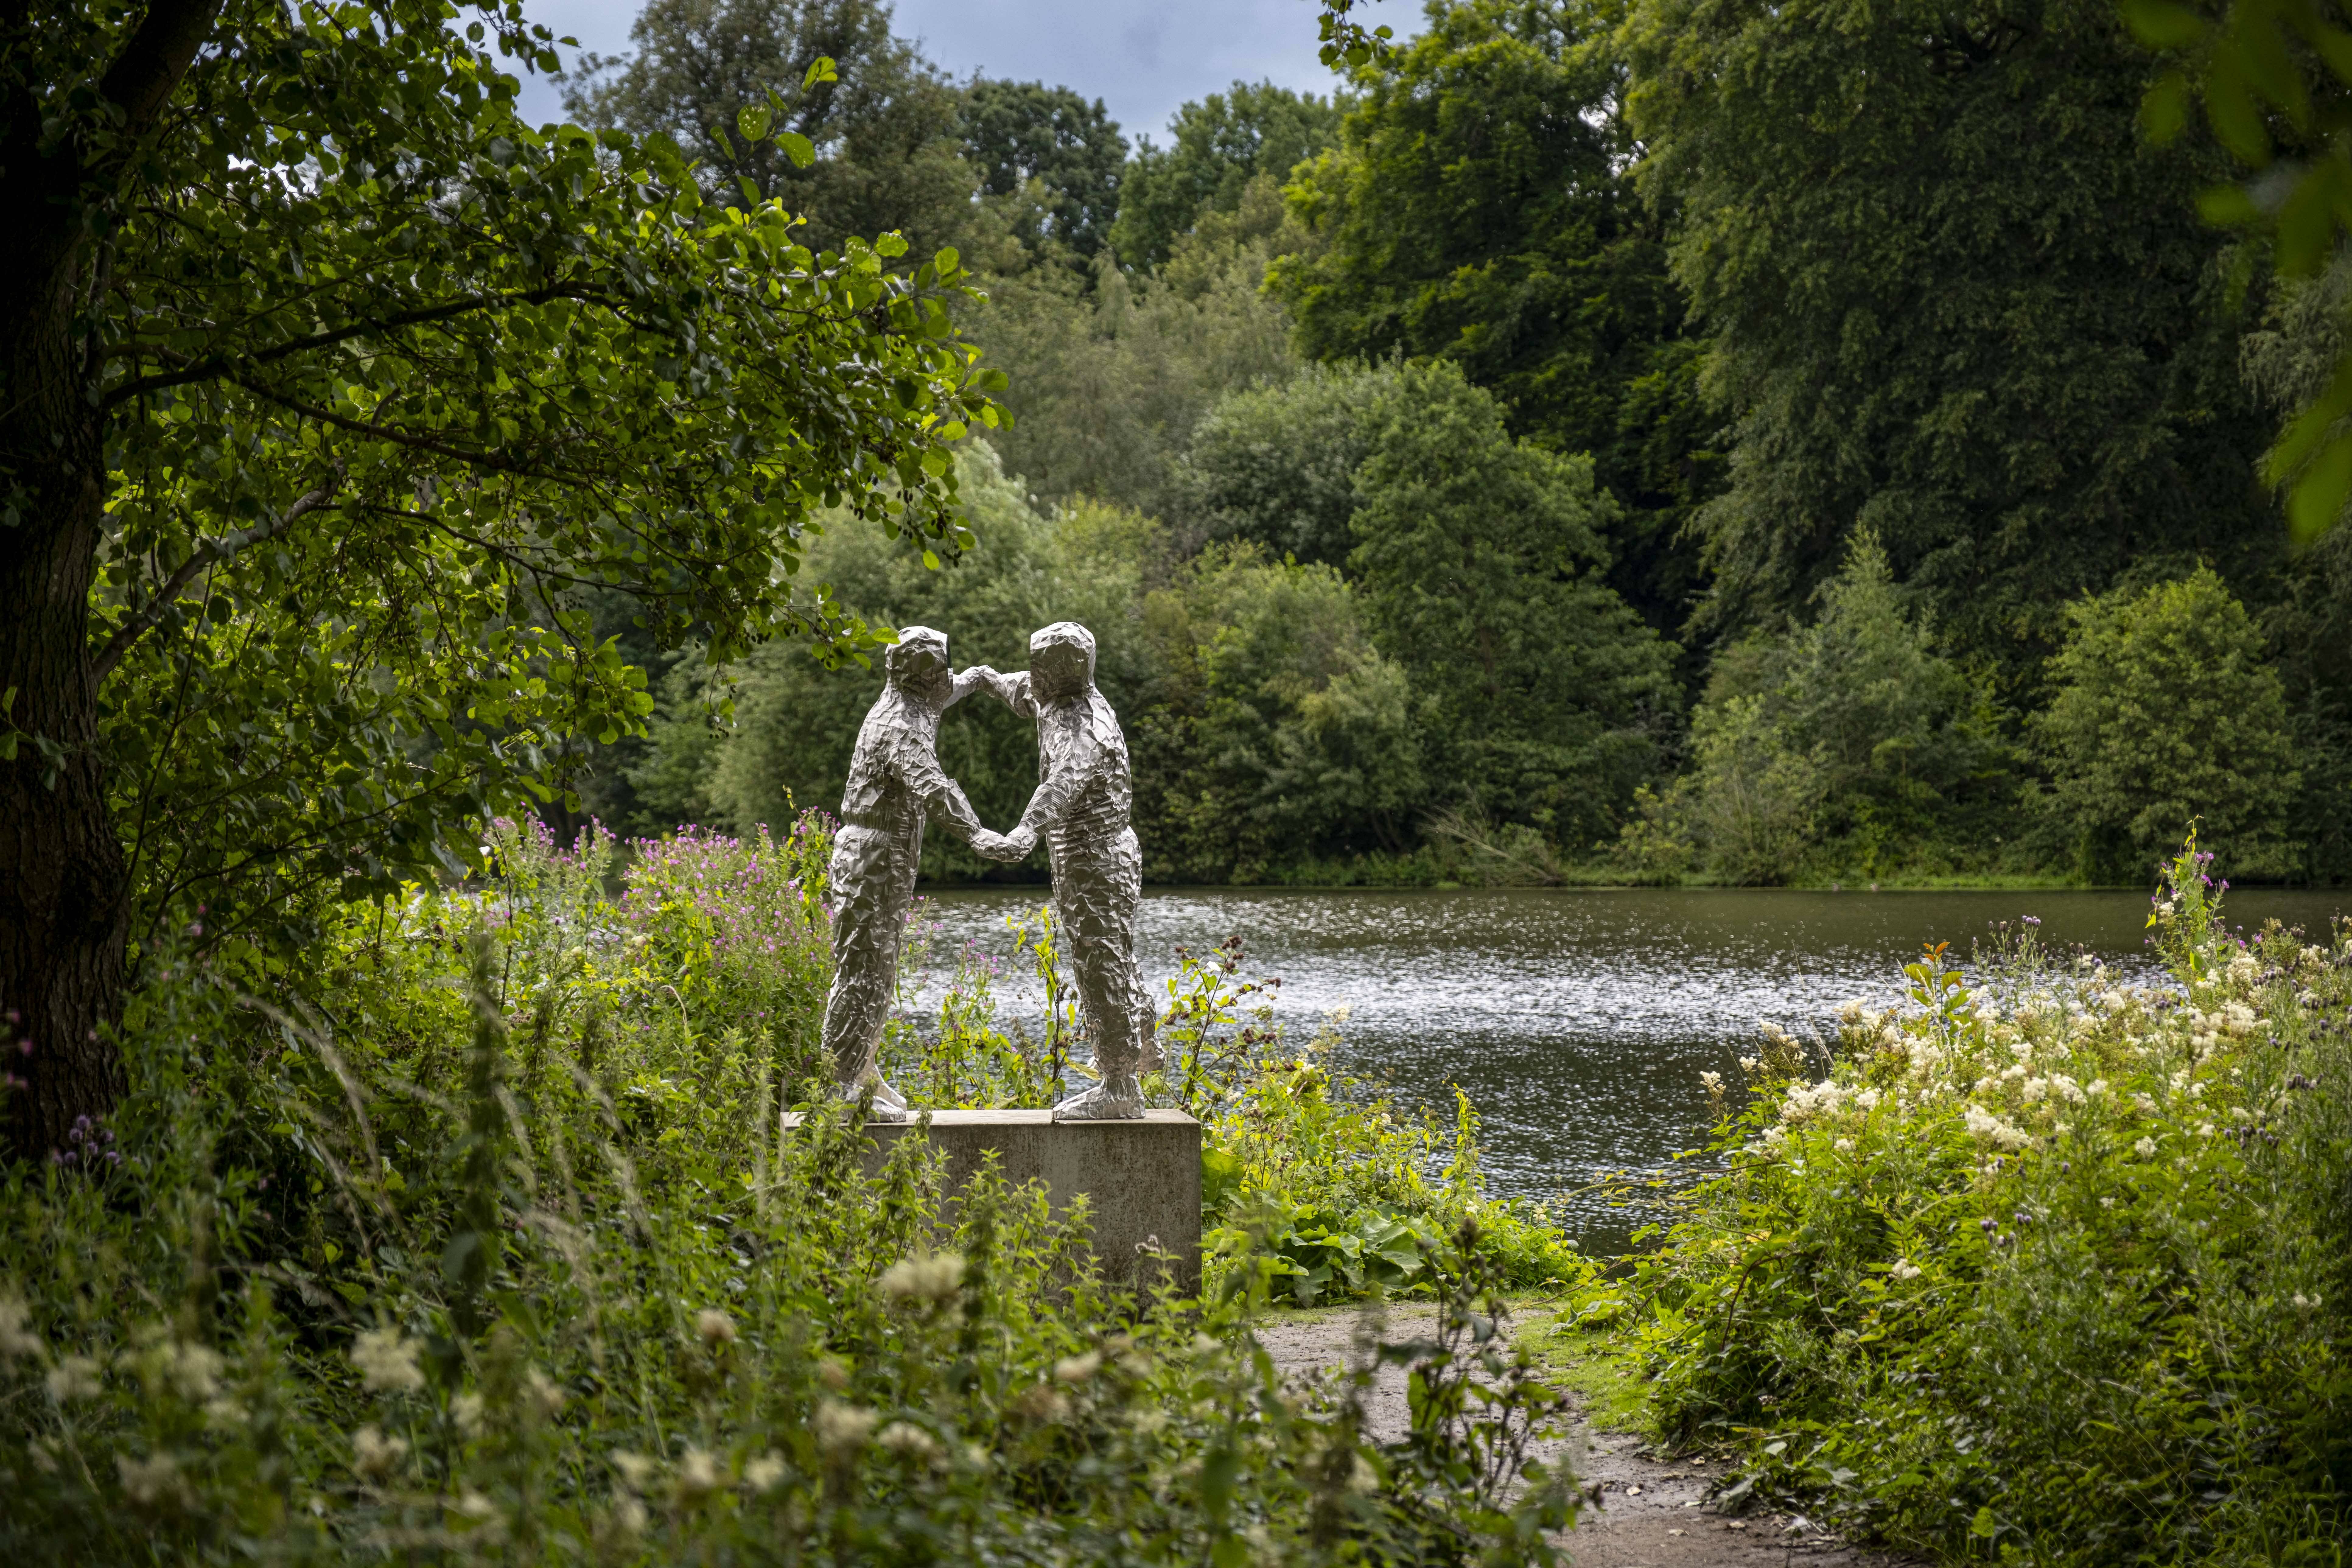 A silver sculpture of two figures dancing. A lake, trees and foliage surround it.